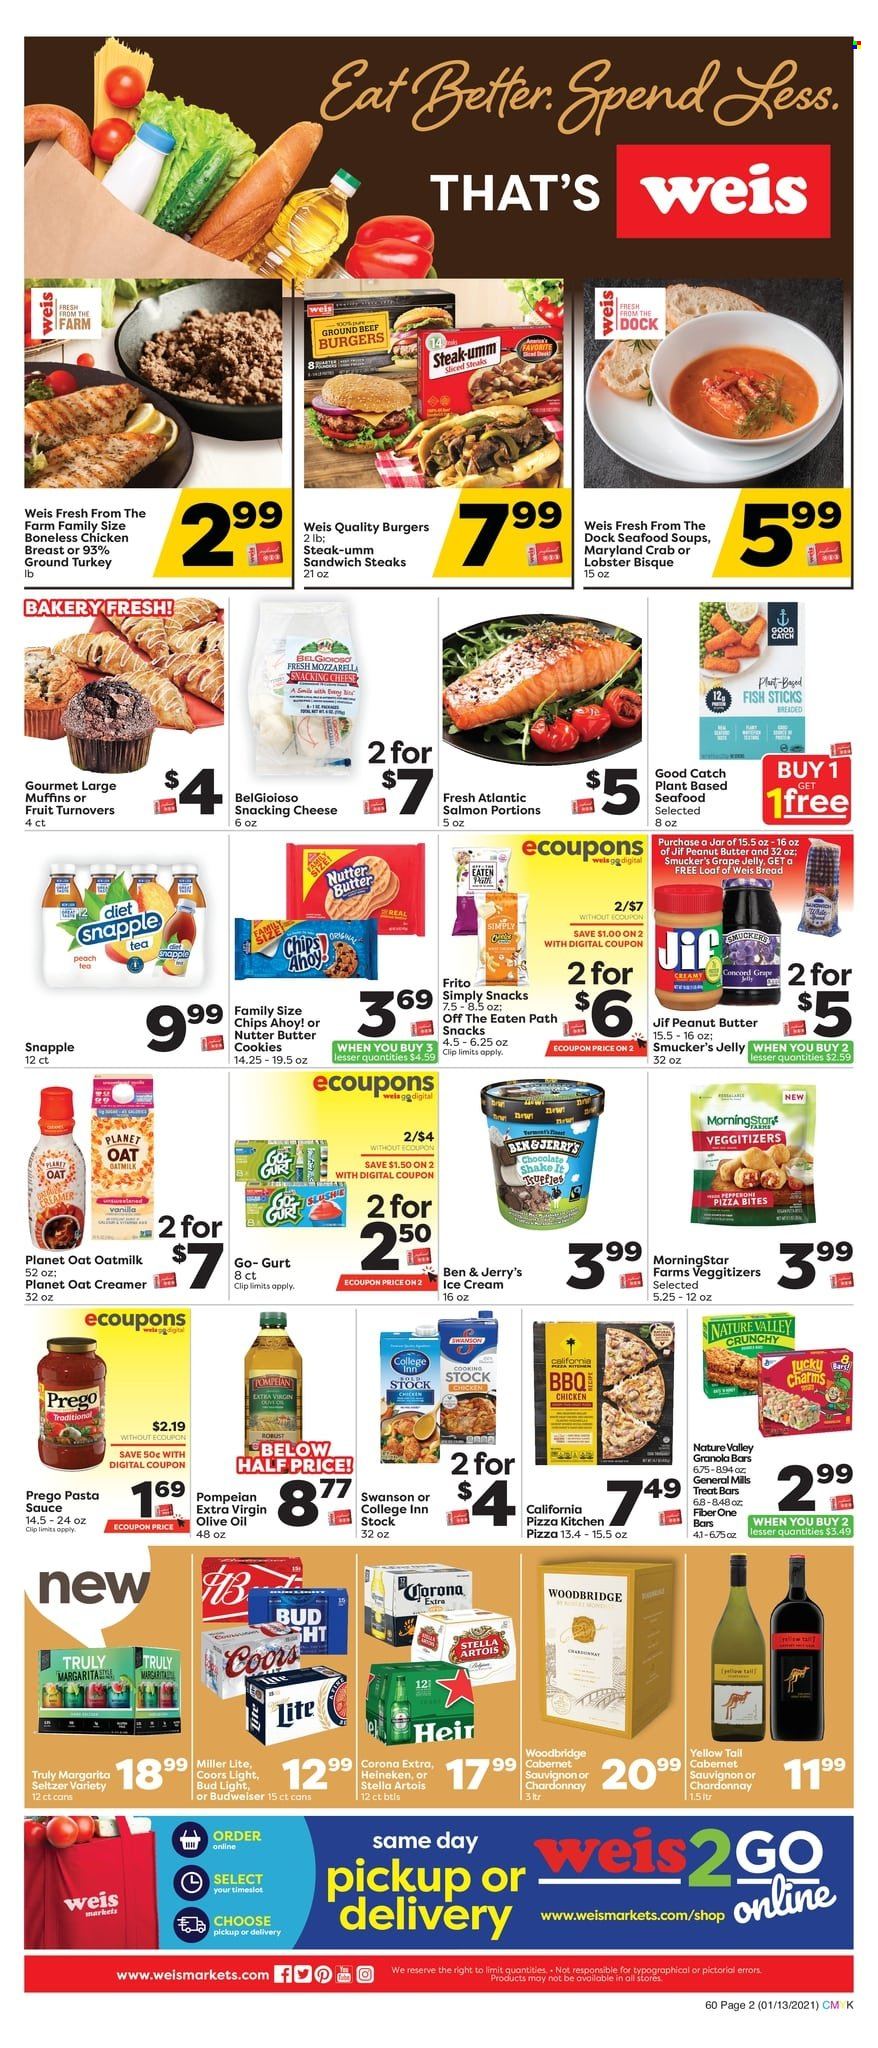 thumbnail - Weis Flyer - 01/13/2022 - 01/20/2022 - Sales products - bread, turnovers, muffin, ground turkey, chicken breasts, steak, hamburger, lobster, salmon, seafood, crab, fish, fish fingers, fish sticks, pizza, pasta sauce, sandwich, sauce, shake, oat milk, creamer, ice cream, Ben & Jerry's, cookies, butter cookies, snack, jelly, Chips Ahoy!, chips, granola bar, Nature Valley, Fiber One, extra virgin olive oil, olive oil, oil, peanut butter, Jif, Snapple, seltzer water, tea, Cabernet Sauvignon, white wine, Chardonnay, Woodbridge, TRULY, beer, Bud Light, Corona Extra, Heineken, jar, Budweiser, Miller Lite, Stella Artois, Coors. Page 2.